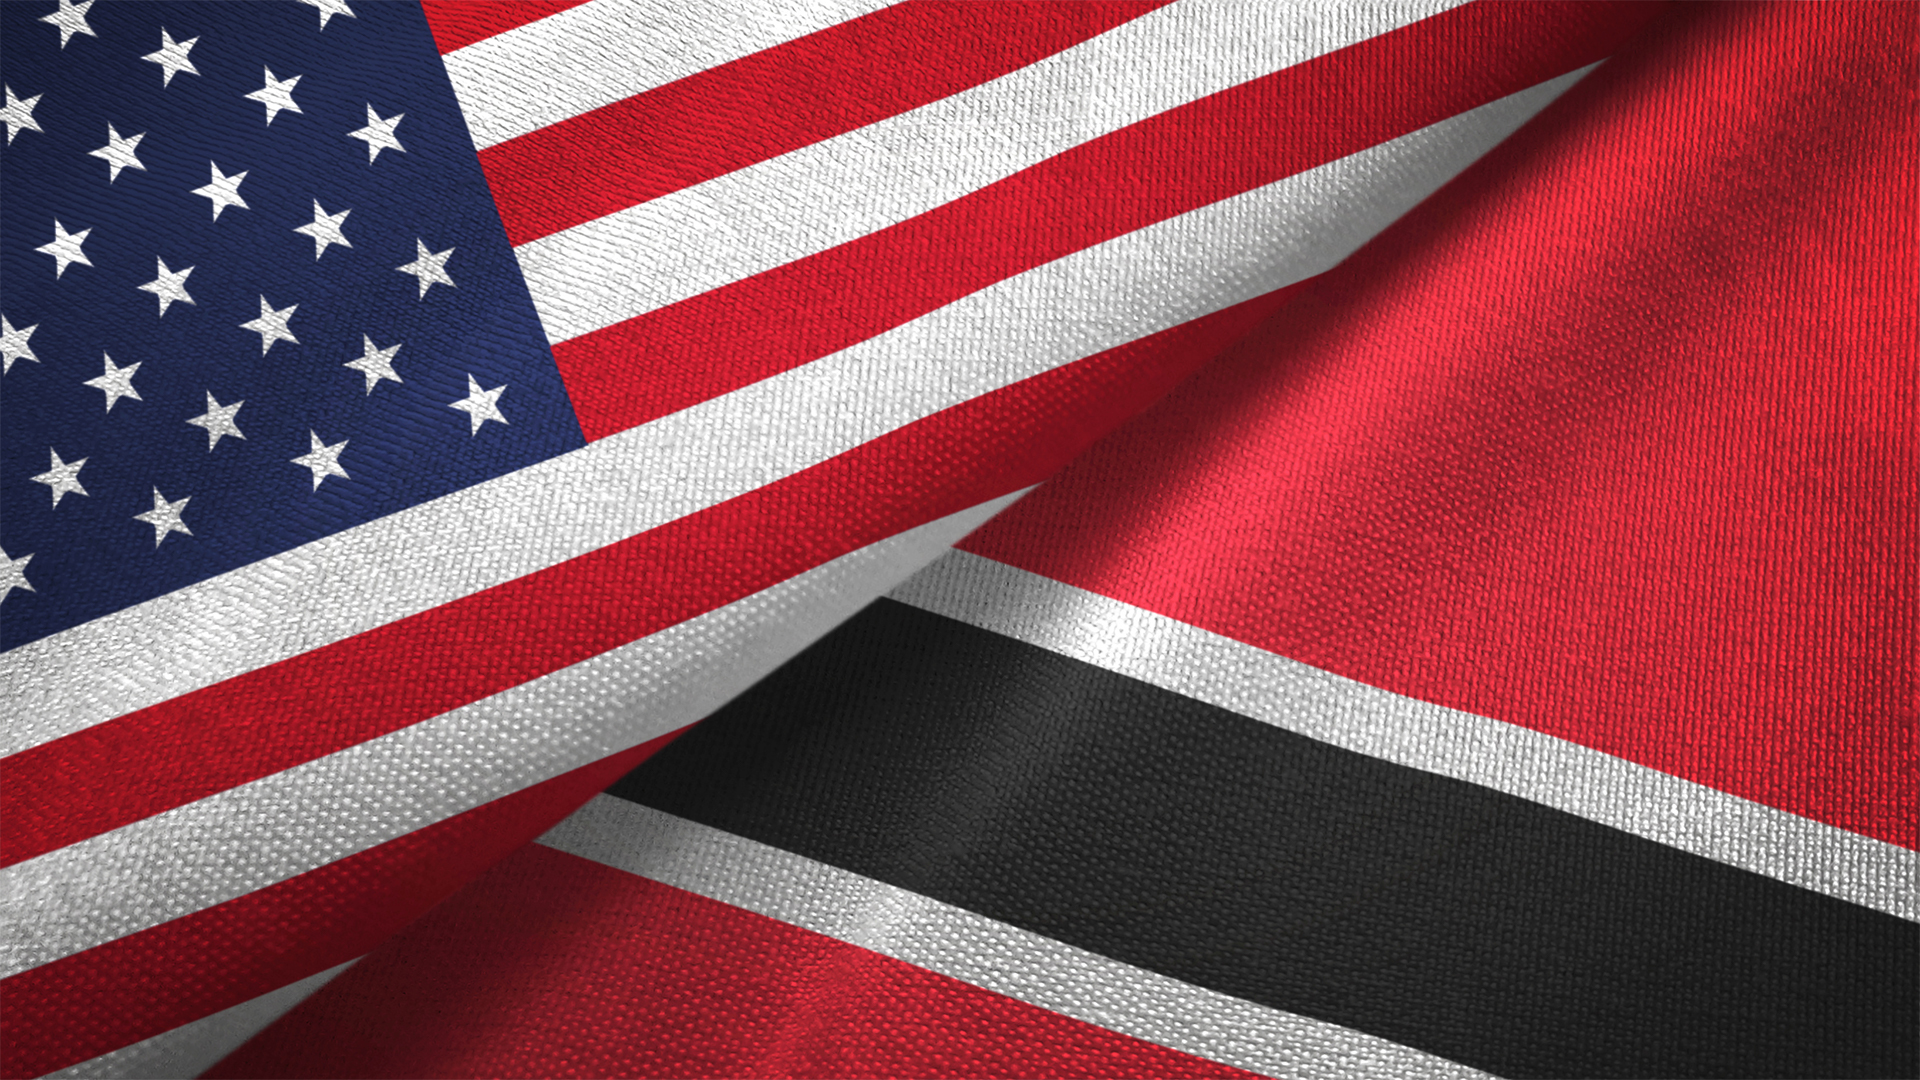 United States and Trinidad and Tobago two flags textile cloth, fabric texture Image